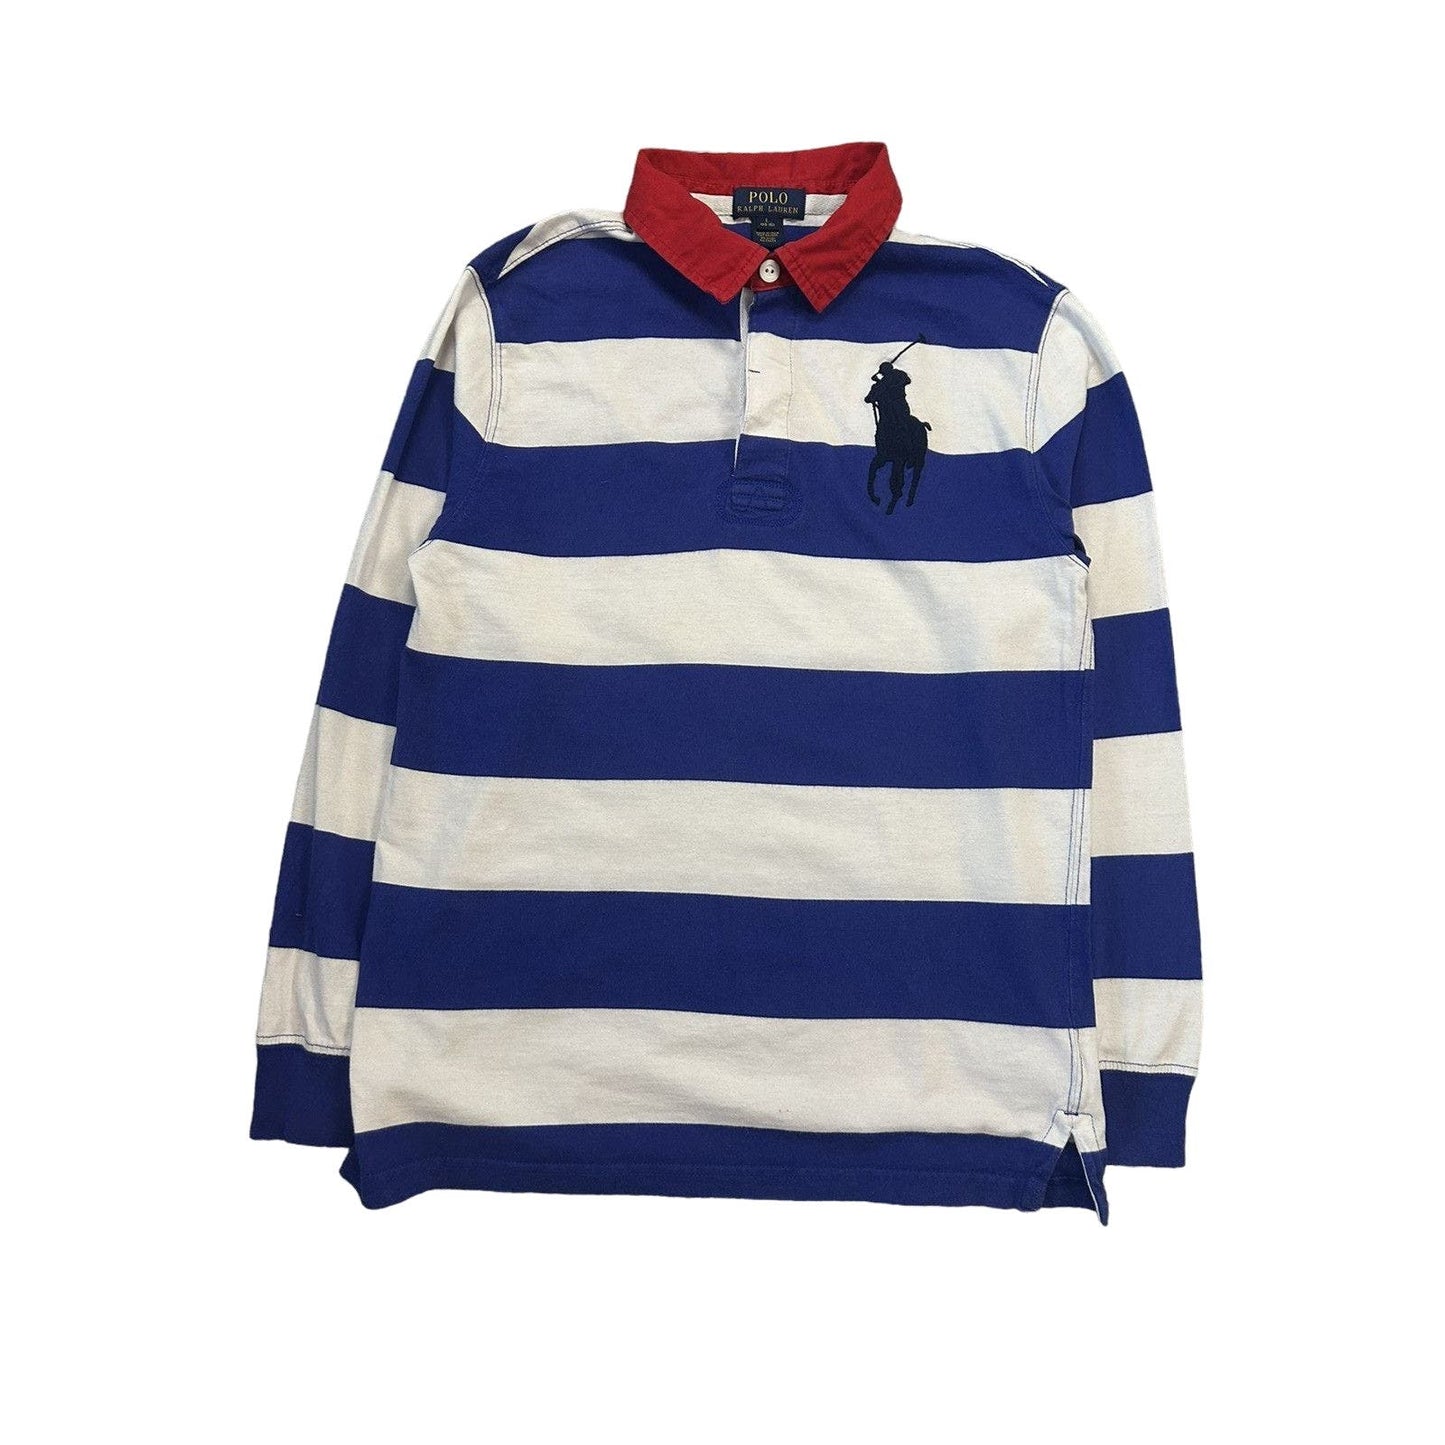 Polo Ralph Lauren vintage longsleeve rugby striped big pony